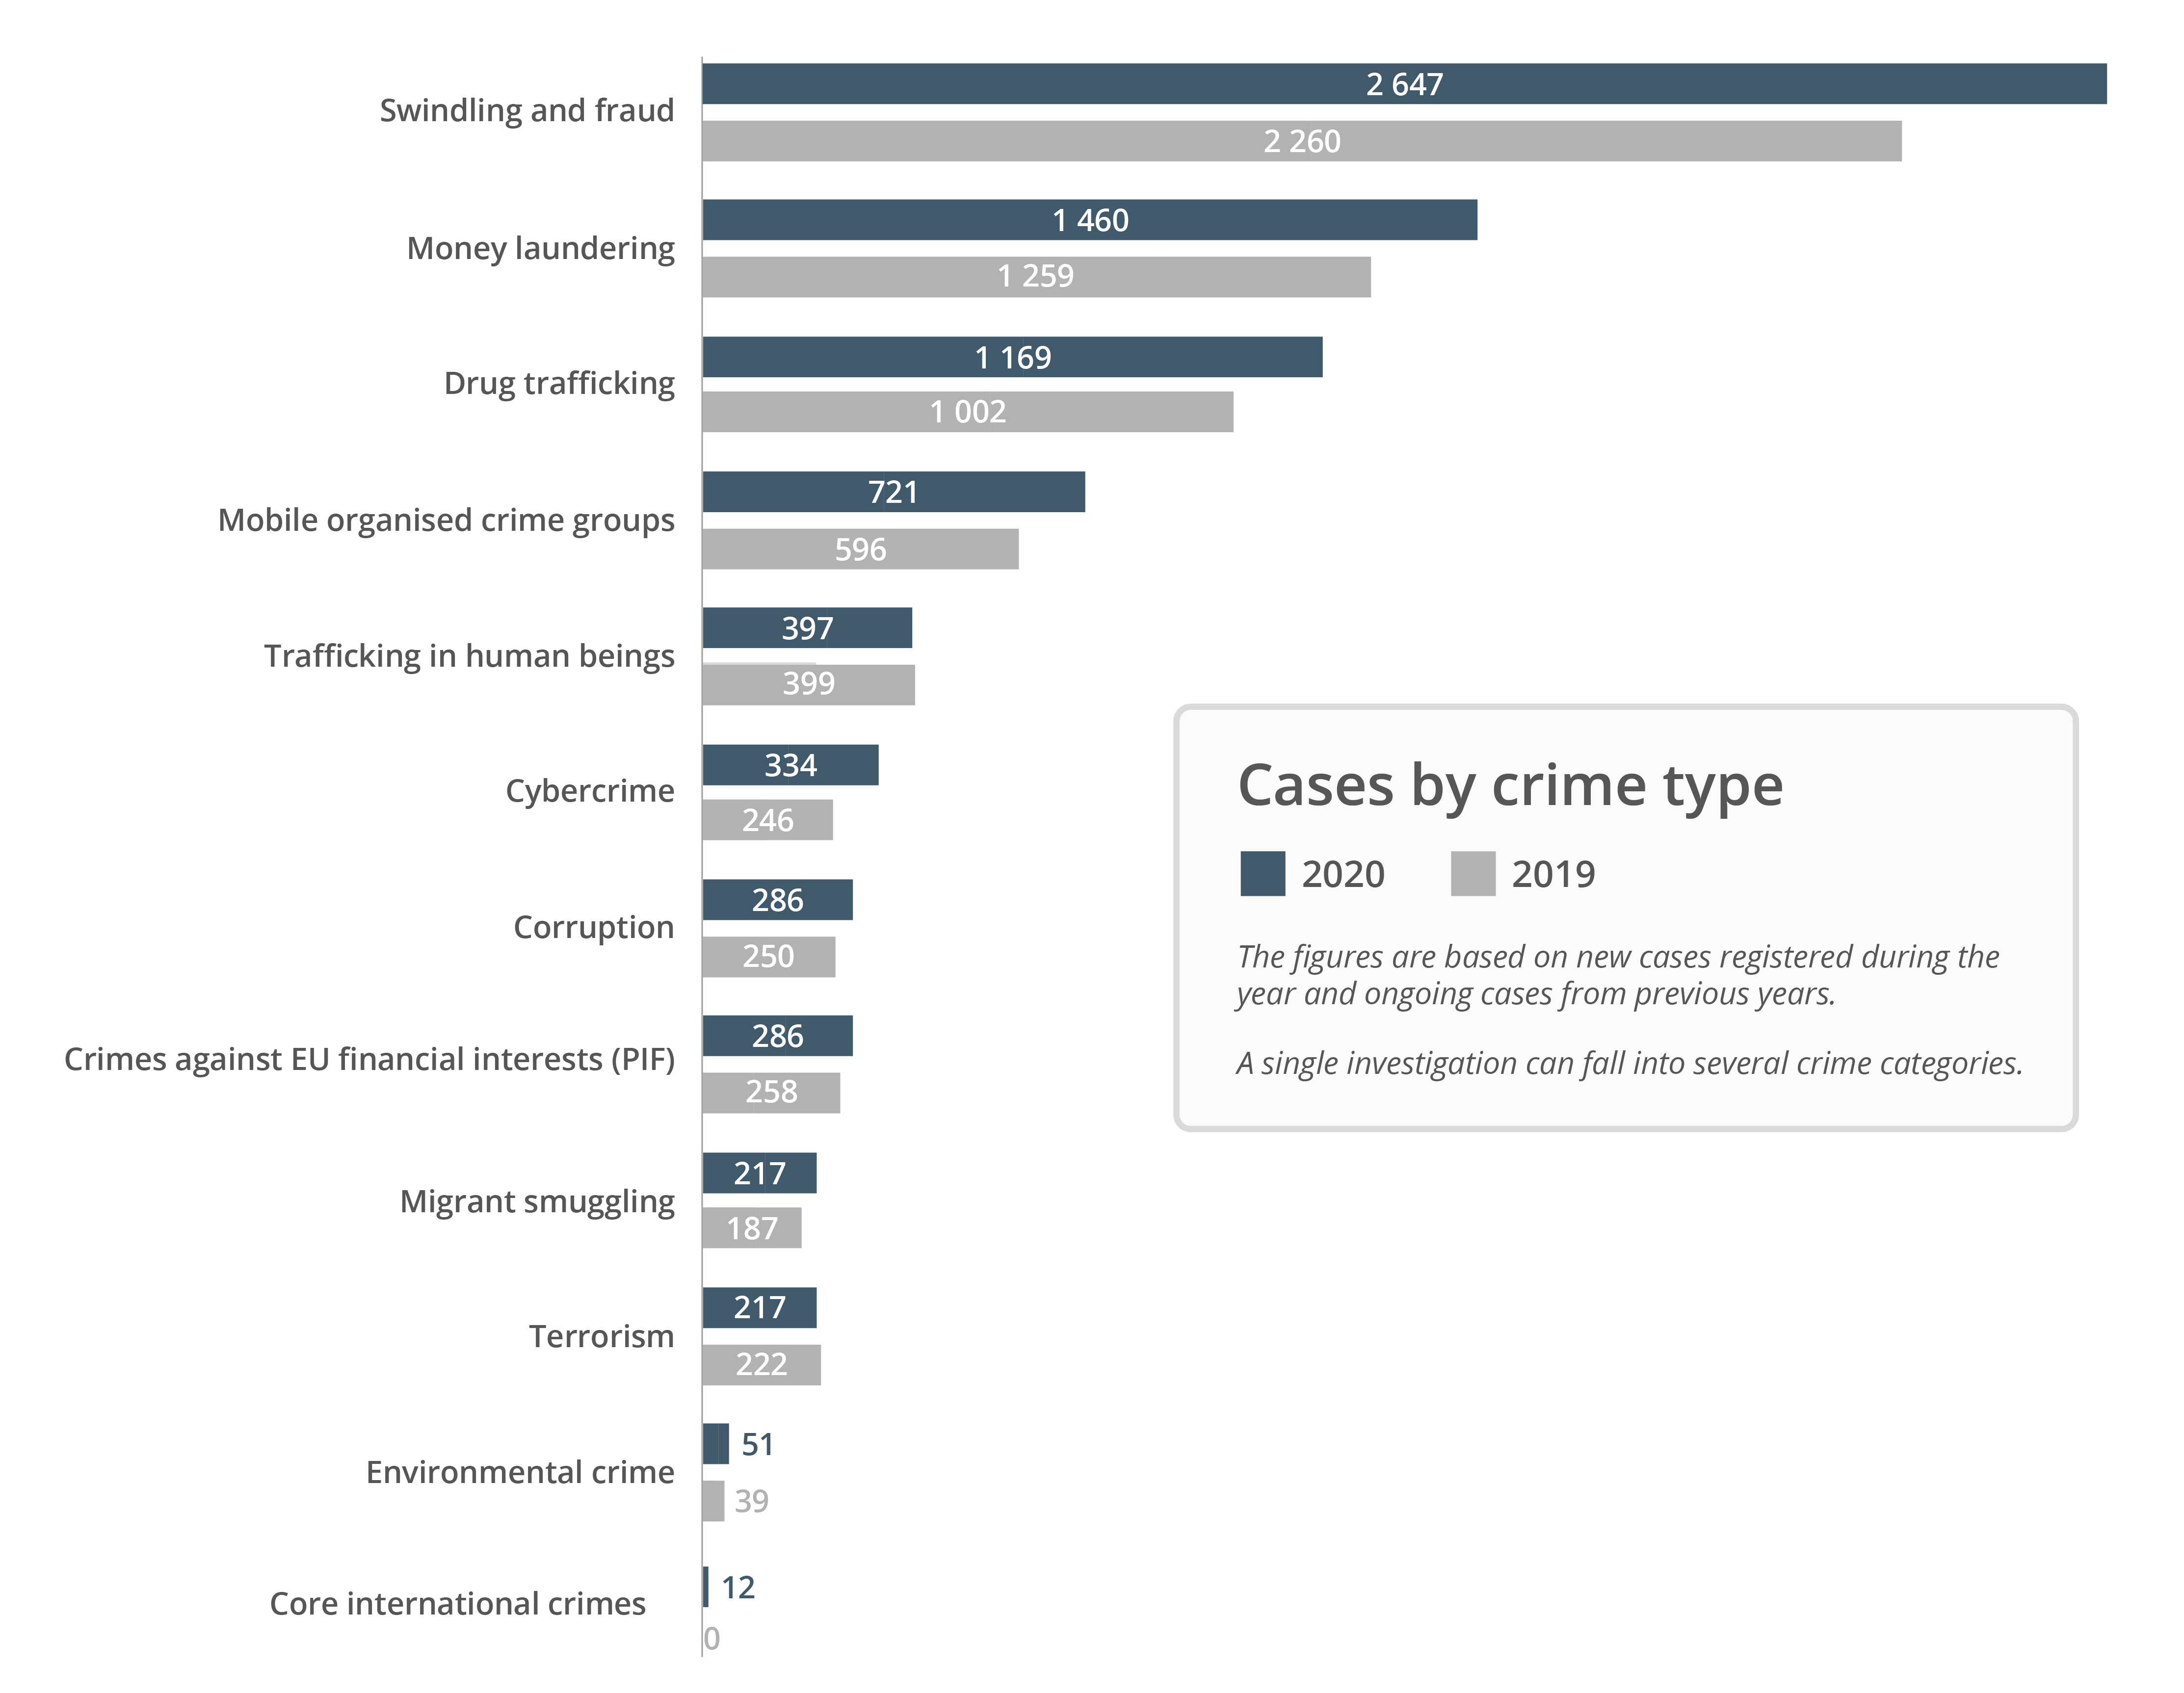 Cases by crime type in 2019 and 2020